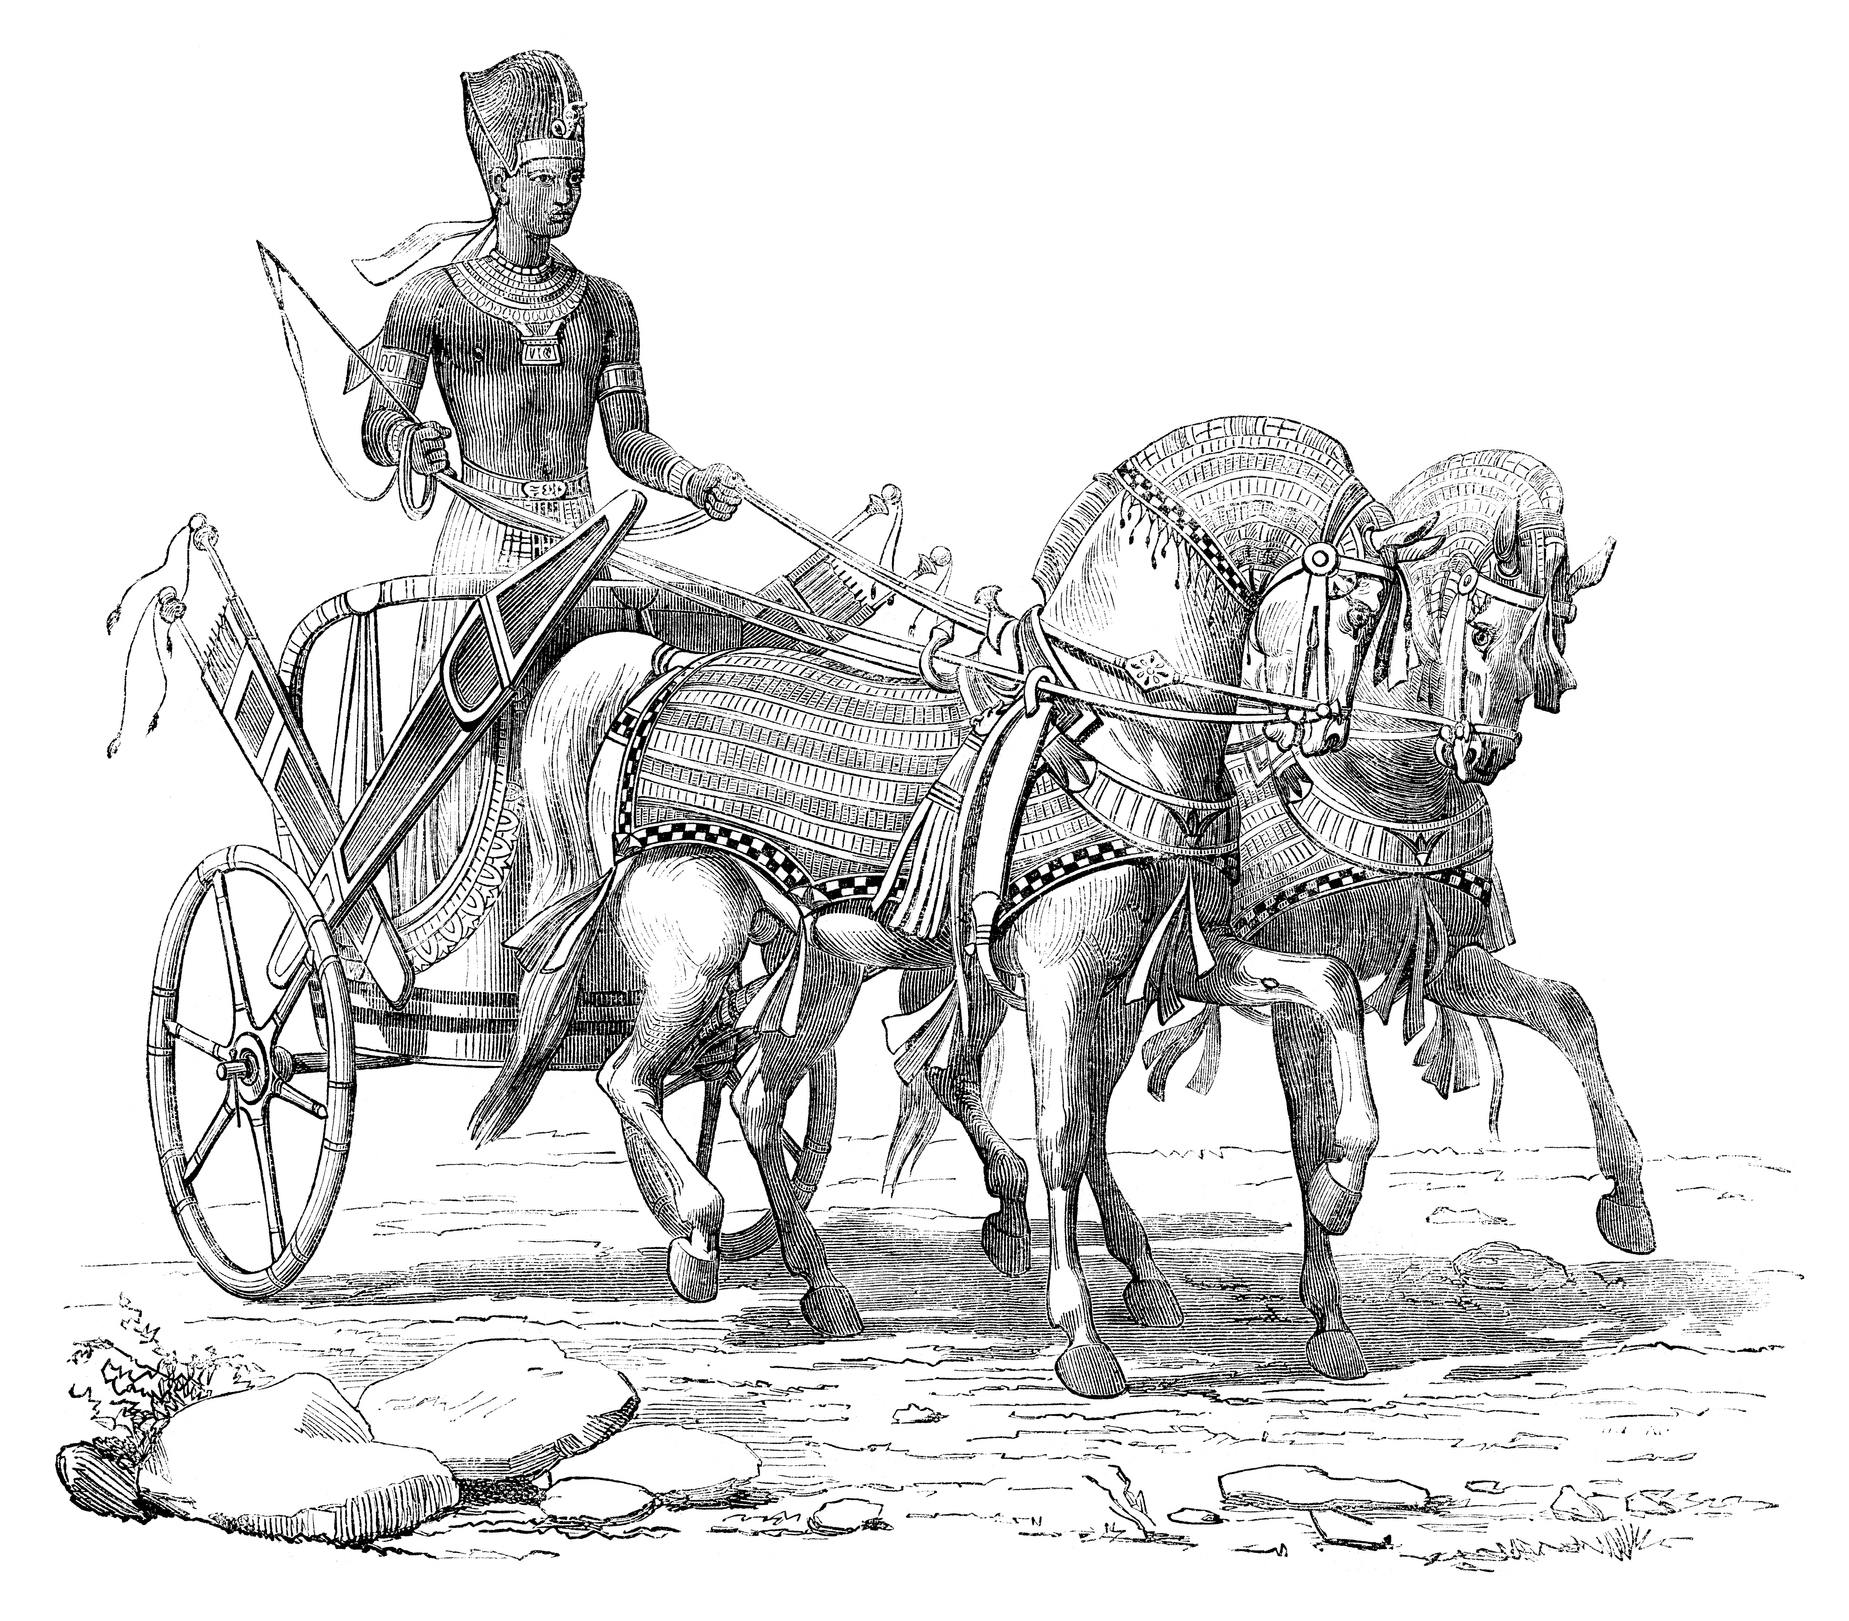 Egyptian chariot use of lubrican